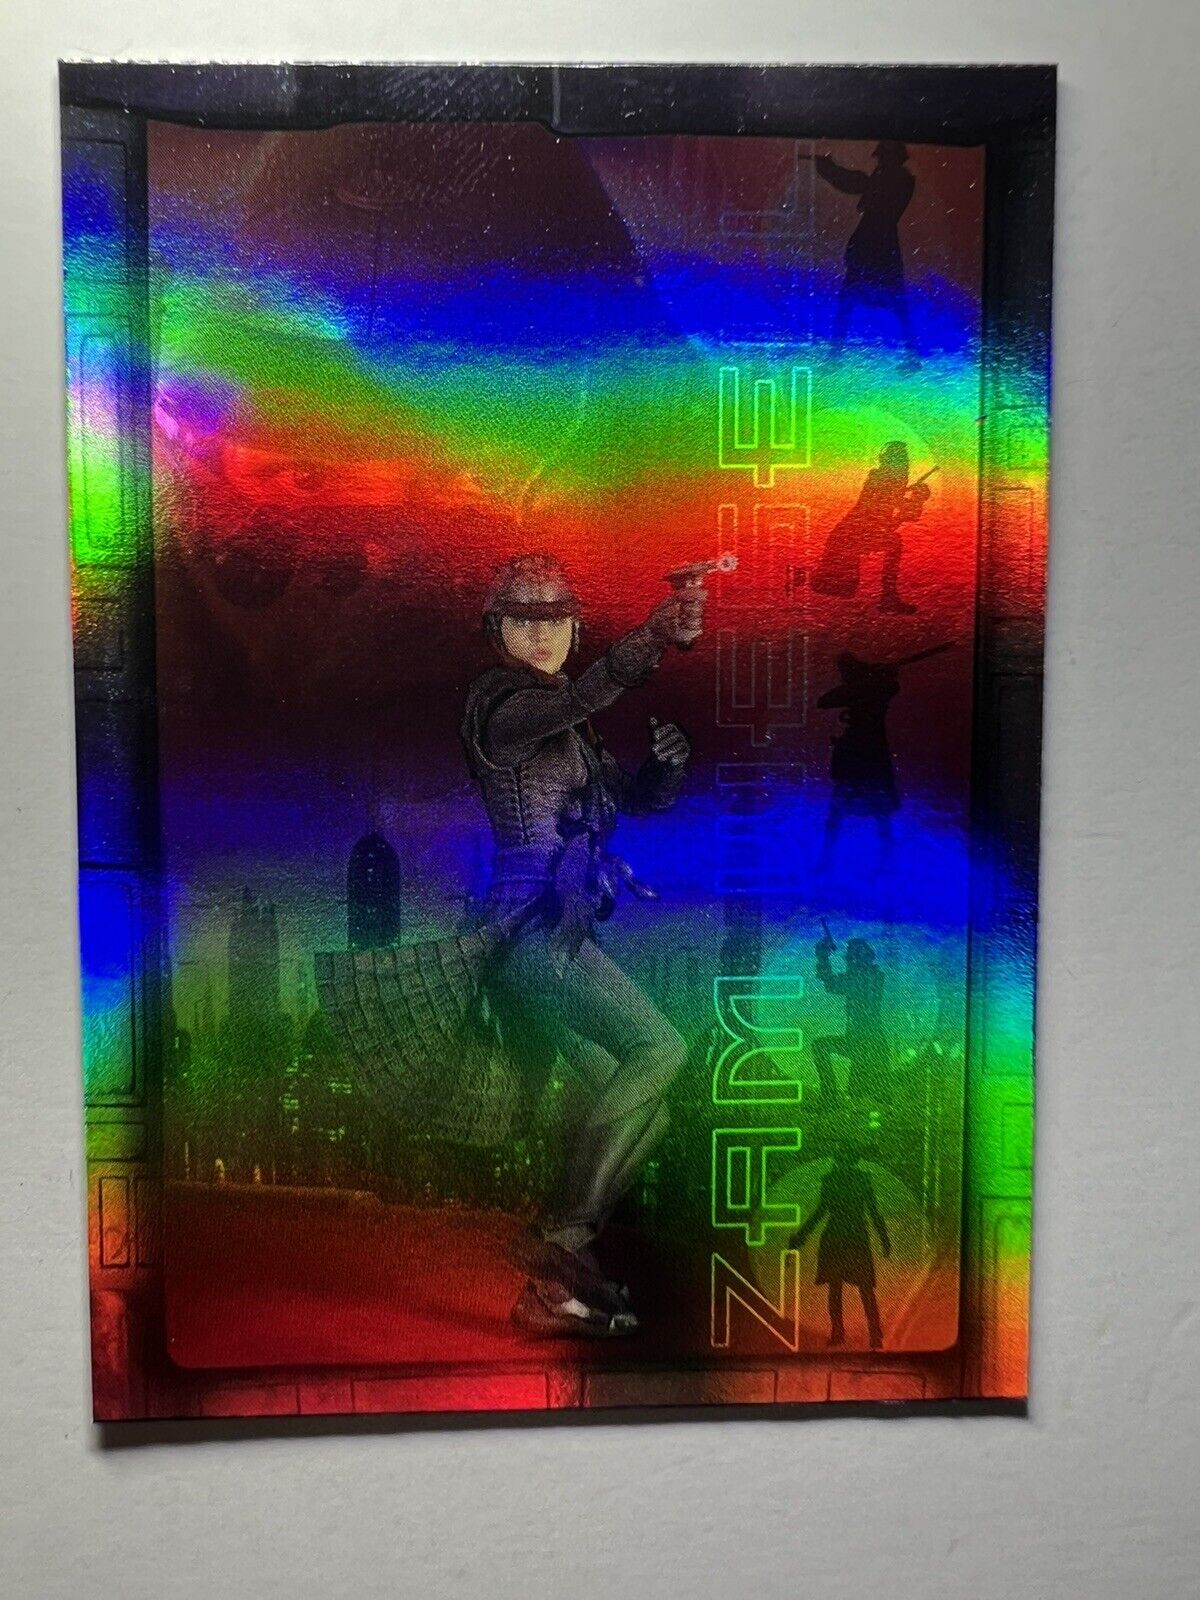 Star Wars: Attack of the Clones Prismatic Foil Card #4/8 ZAM WESELL 2002 EX/EX+